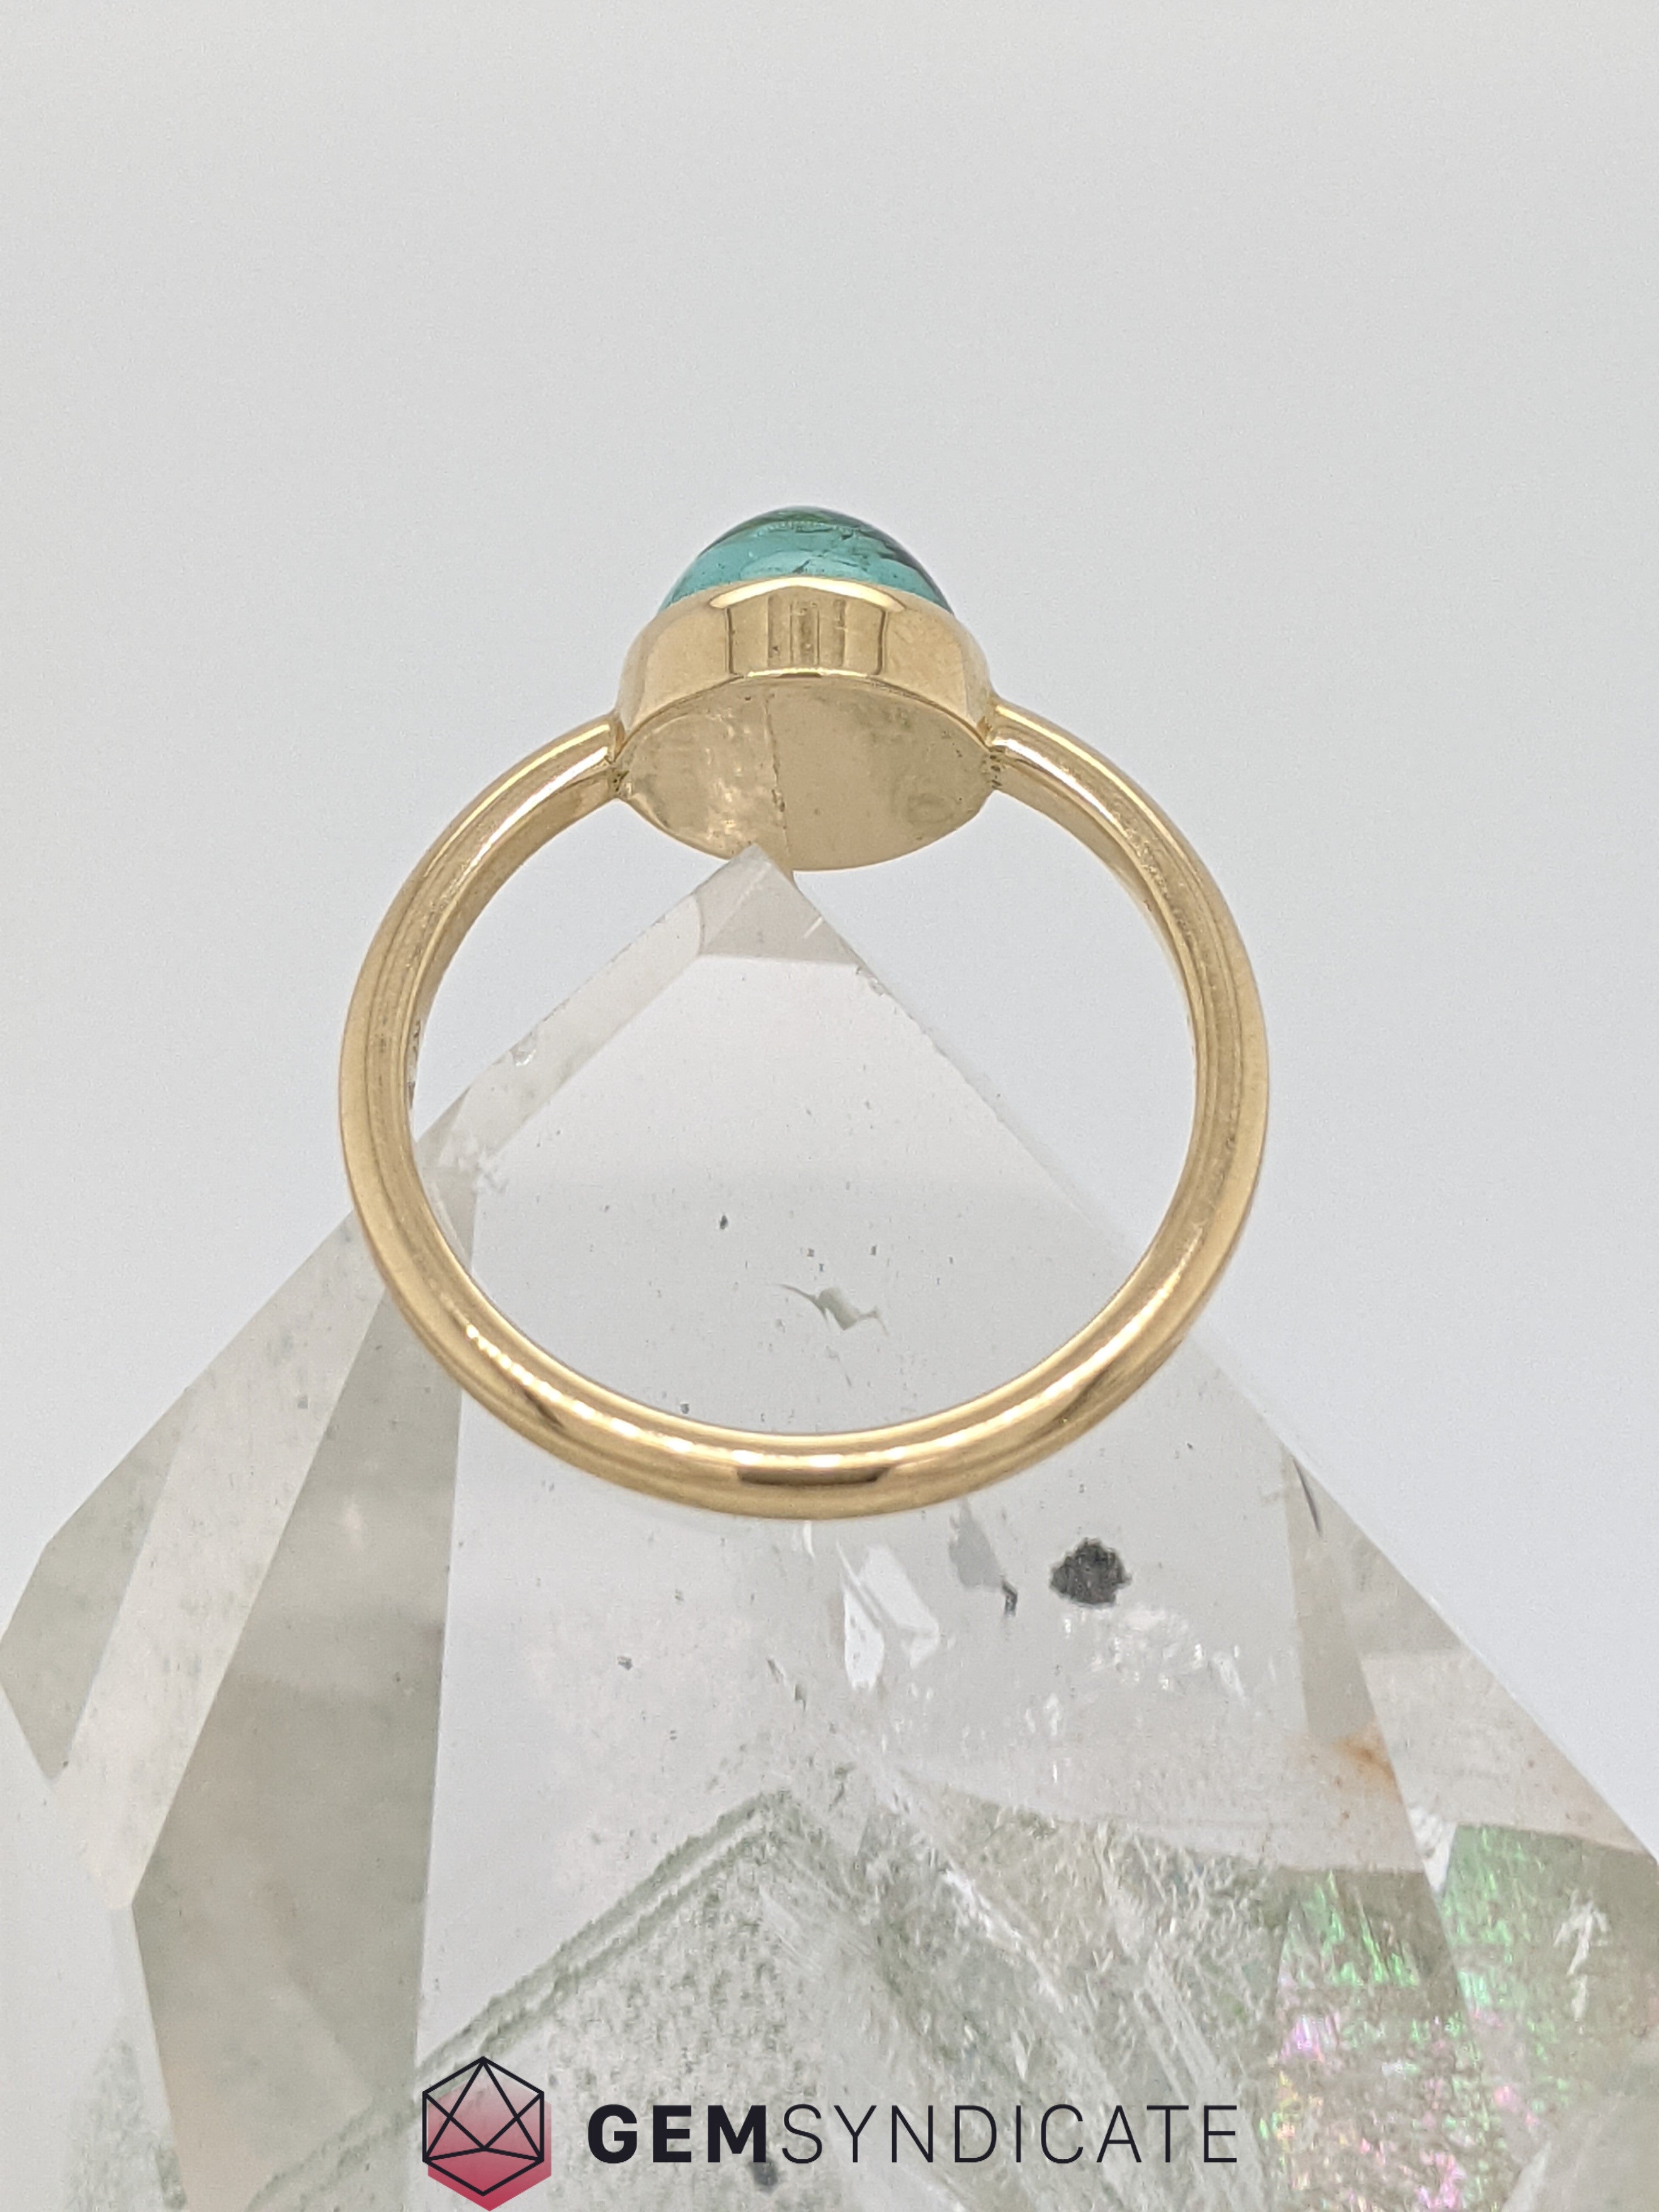 Sophisticated Green Tourmaline Ring in 14k Yellow Gold